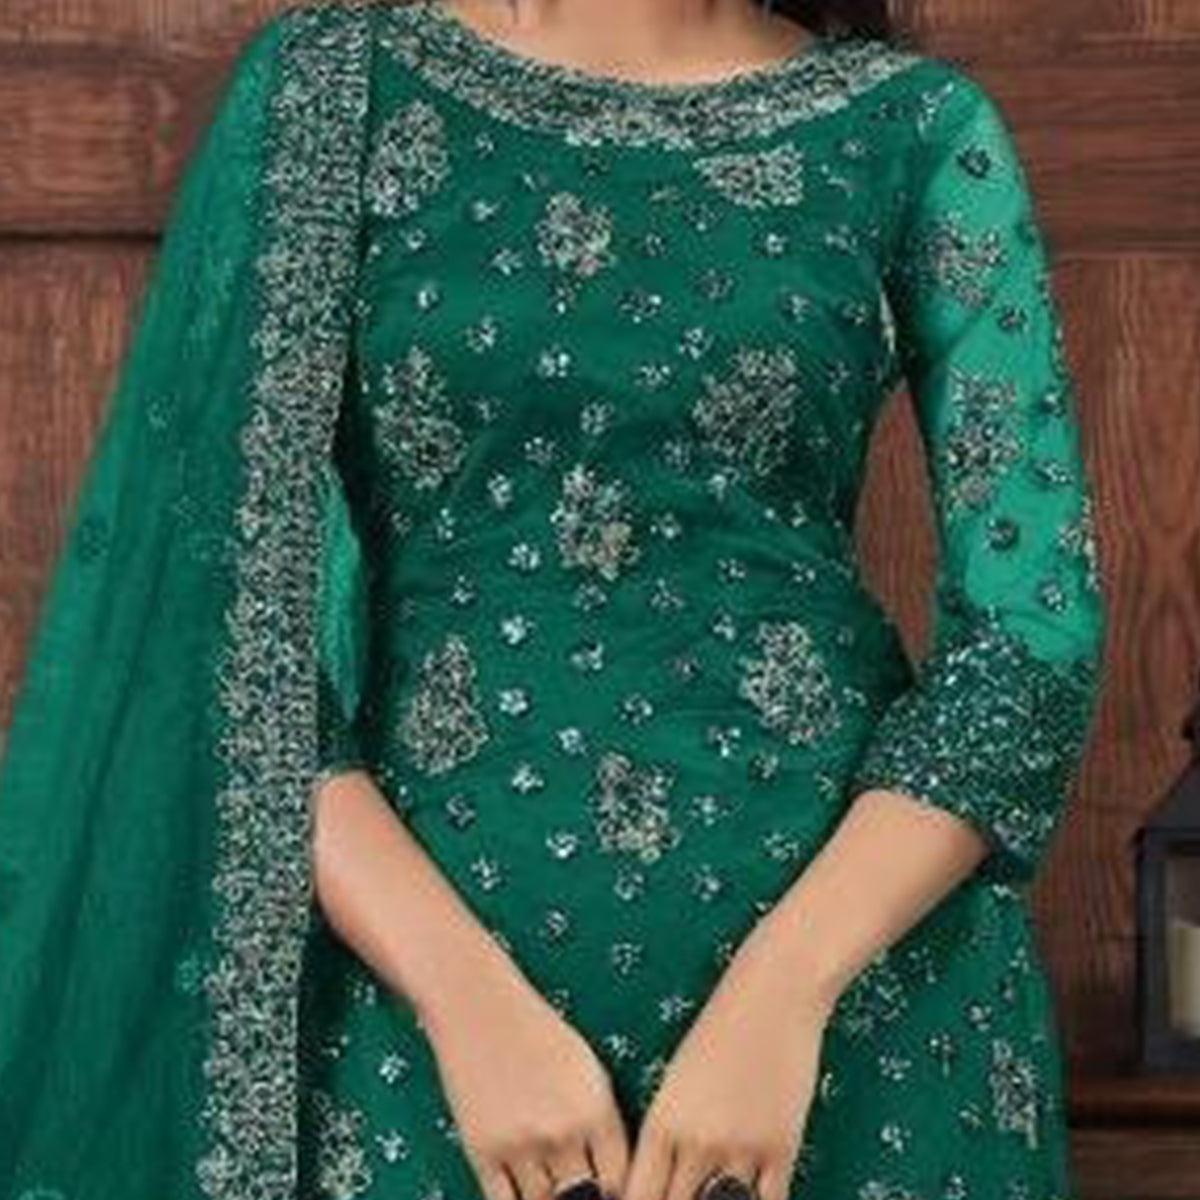 Mesmerising Bottle Green Colored Partywear Embroidered Net Palazzo Suit - Peachmode